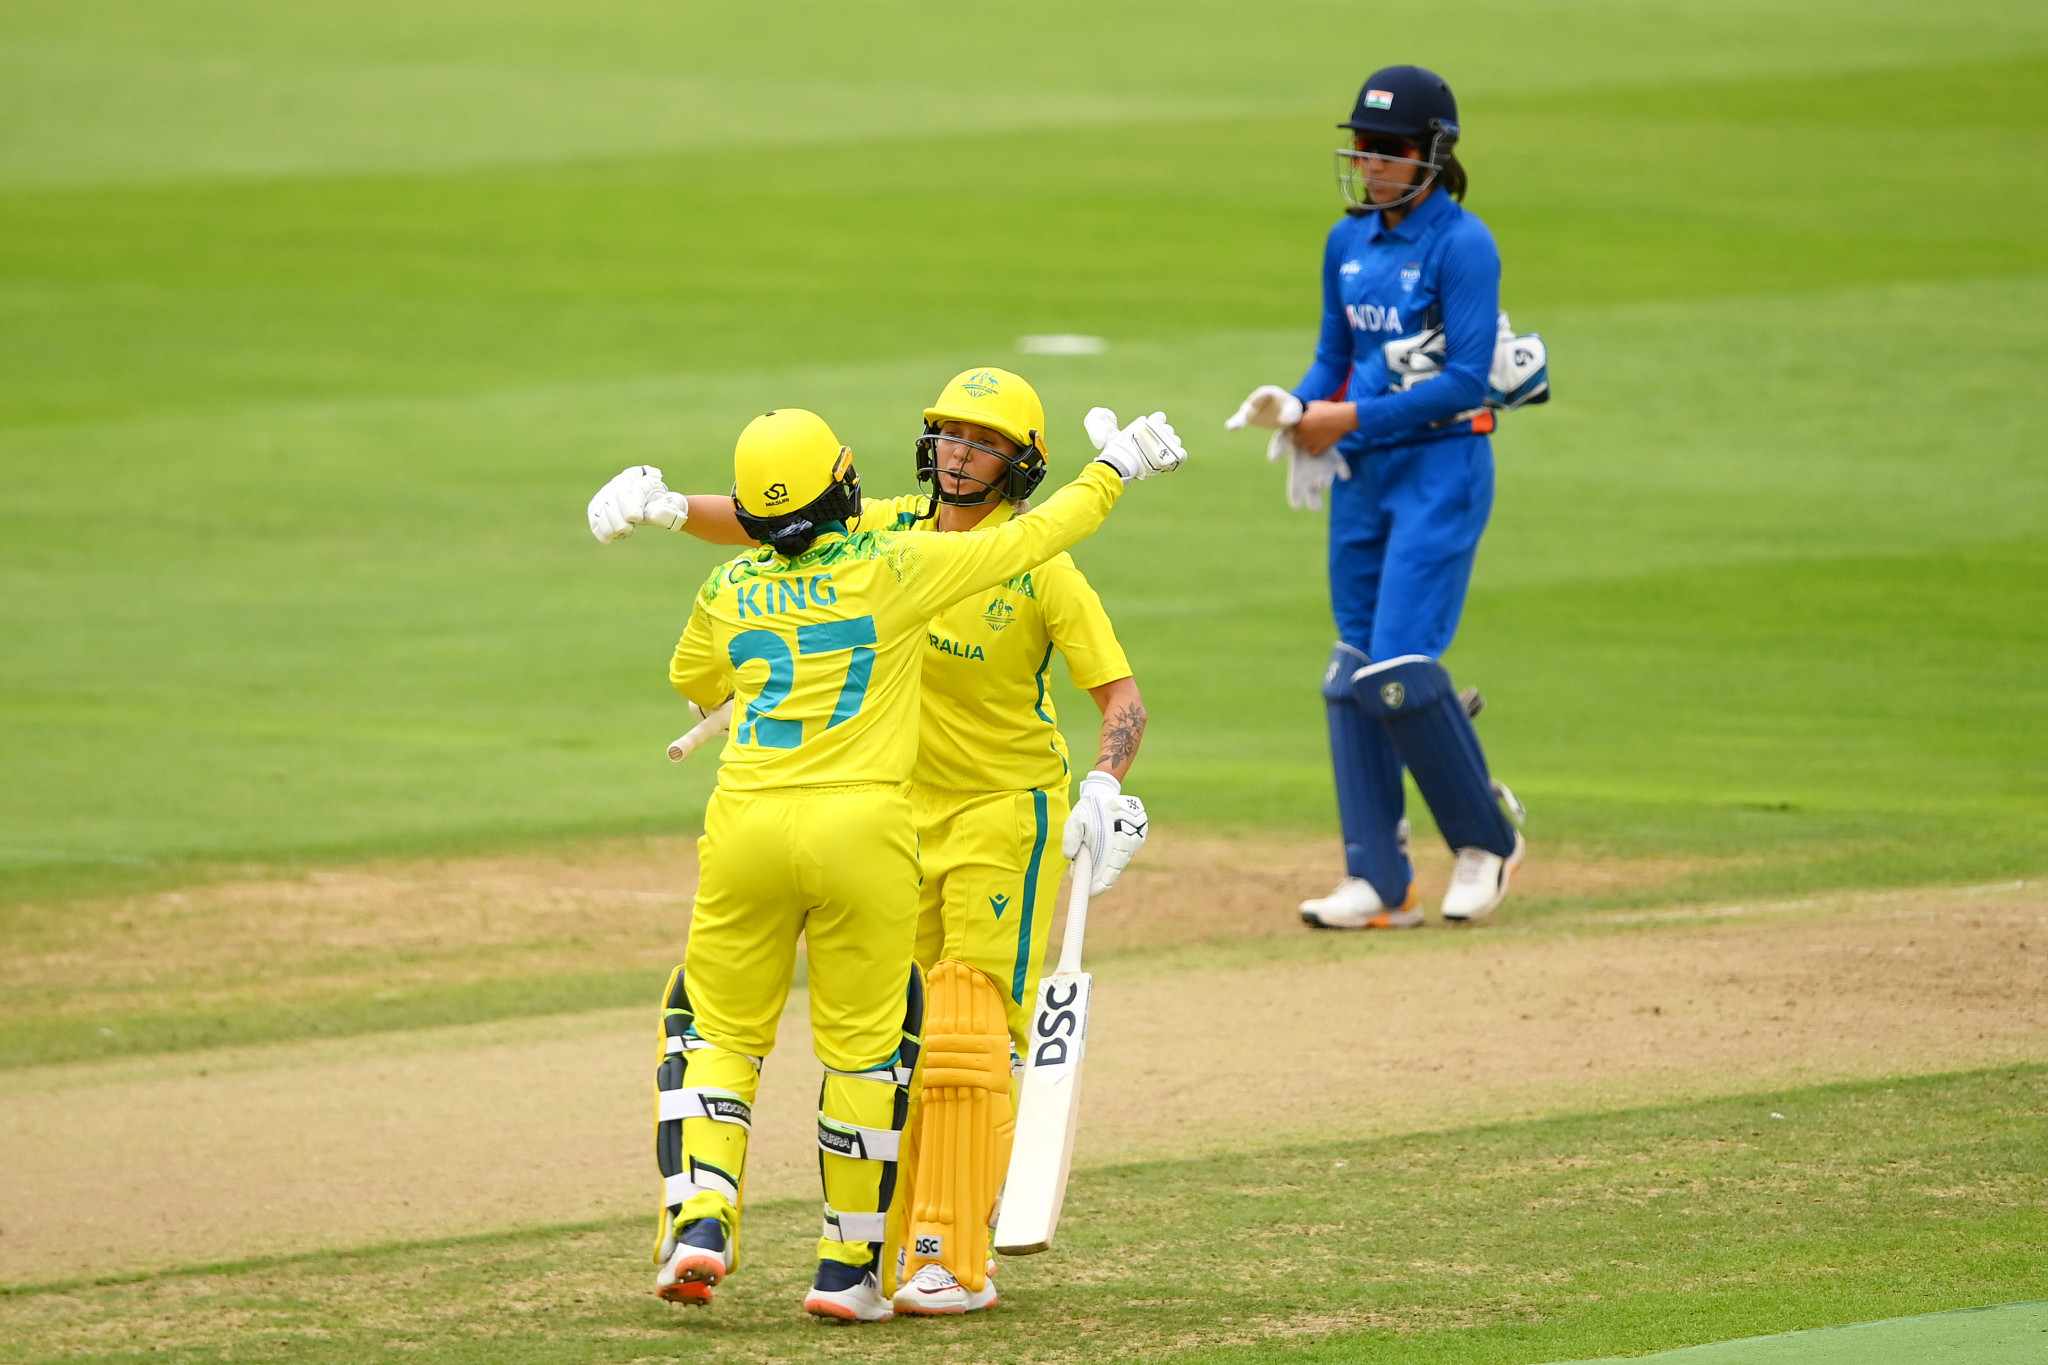 Victories for Australia and Barbados on first day of T20 cricket at Birmingham 2022